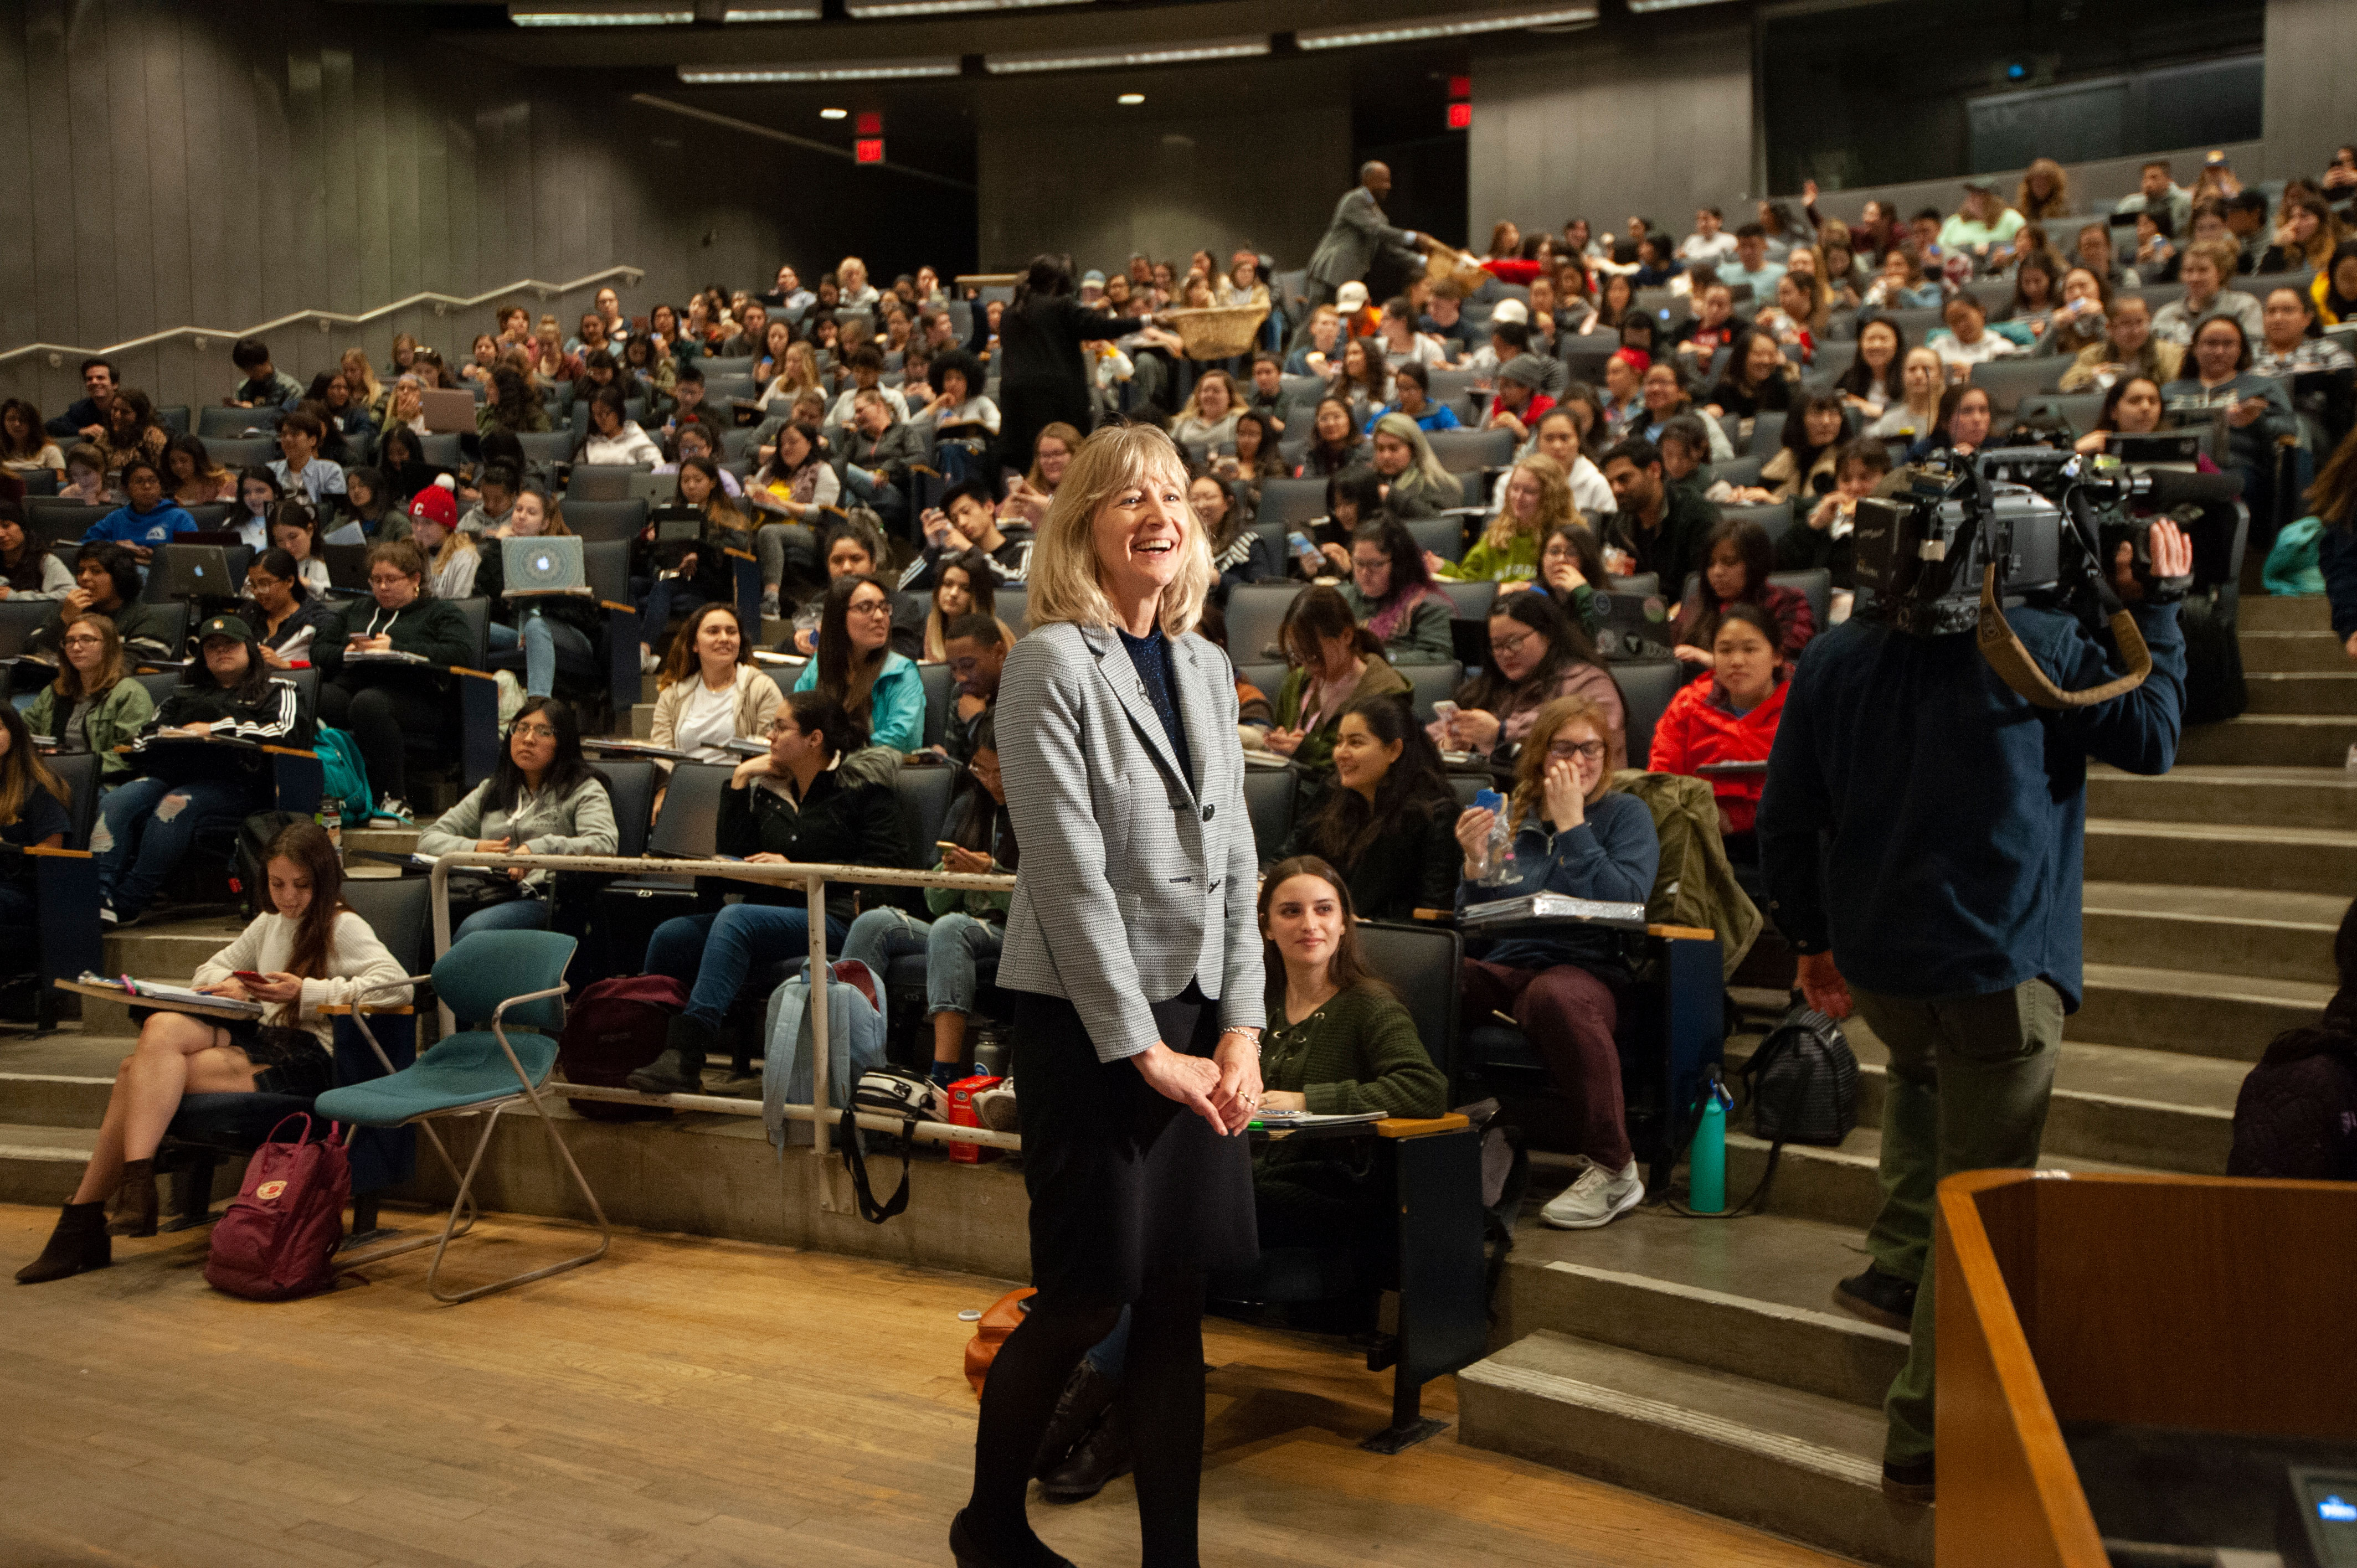 Animal Science Professor Anita Oberbauer won the UC Davis Prize for Undergraduate Teaching and Scholarly Achievement. Her “Companion Animal Biology” class is as popular as ever.